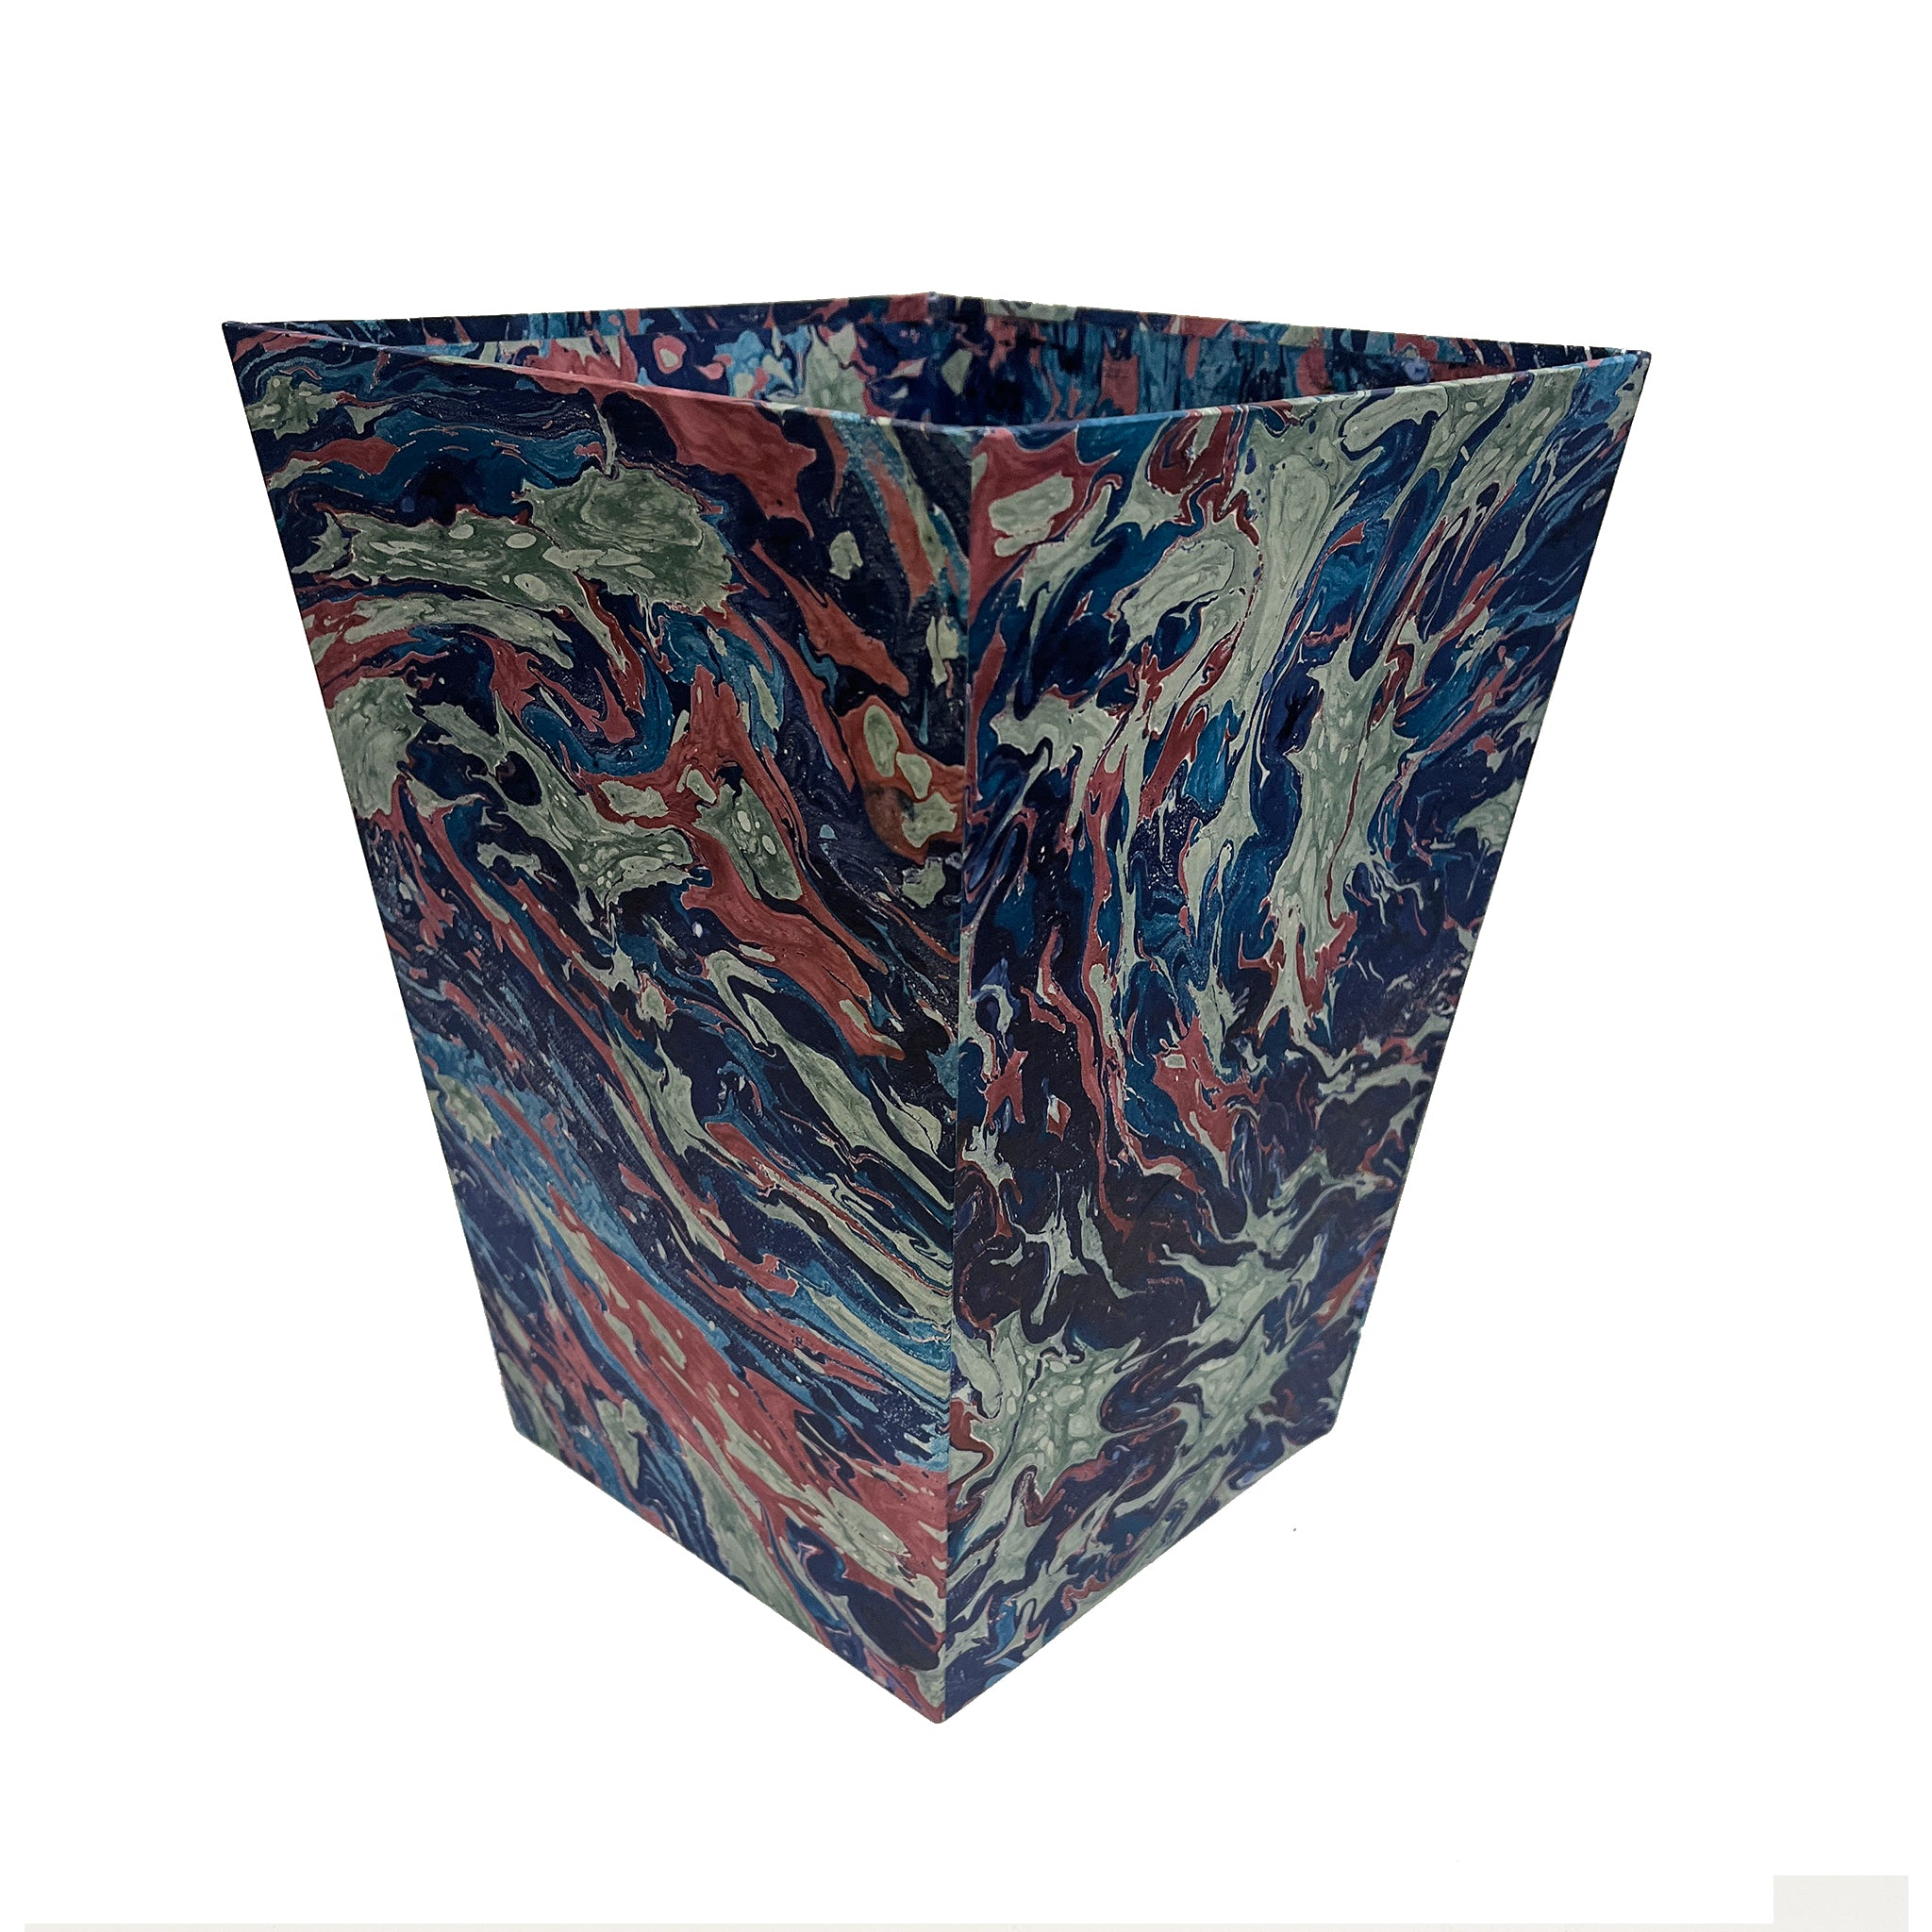 Hand-Marbled Paper-Covered Waste Bin